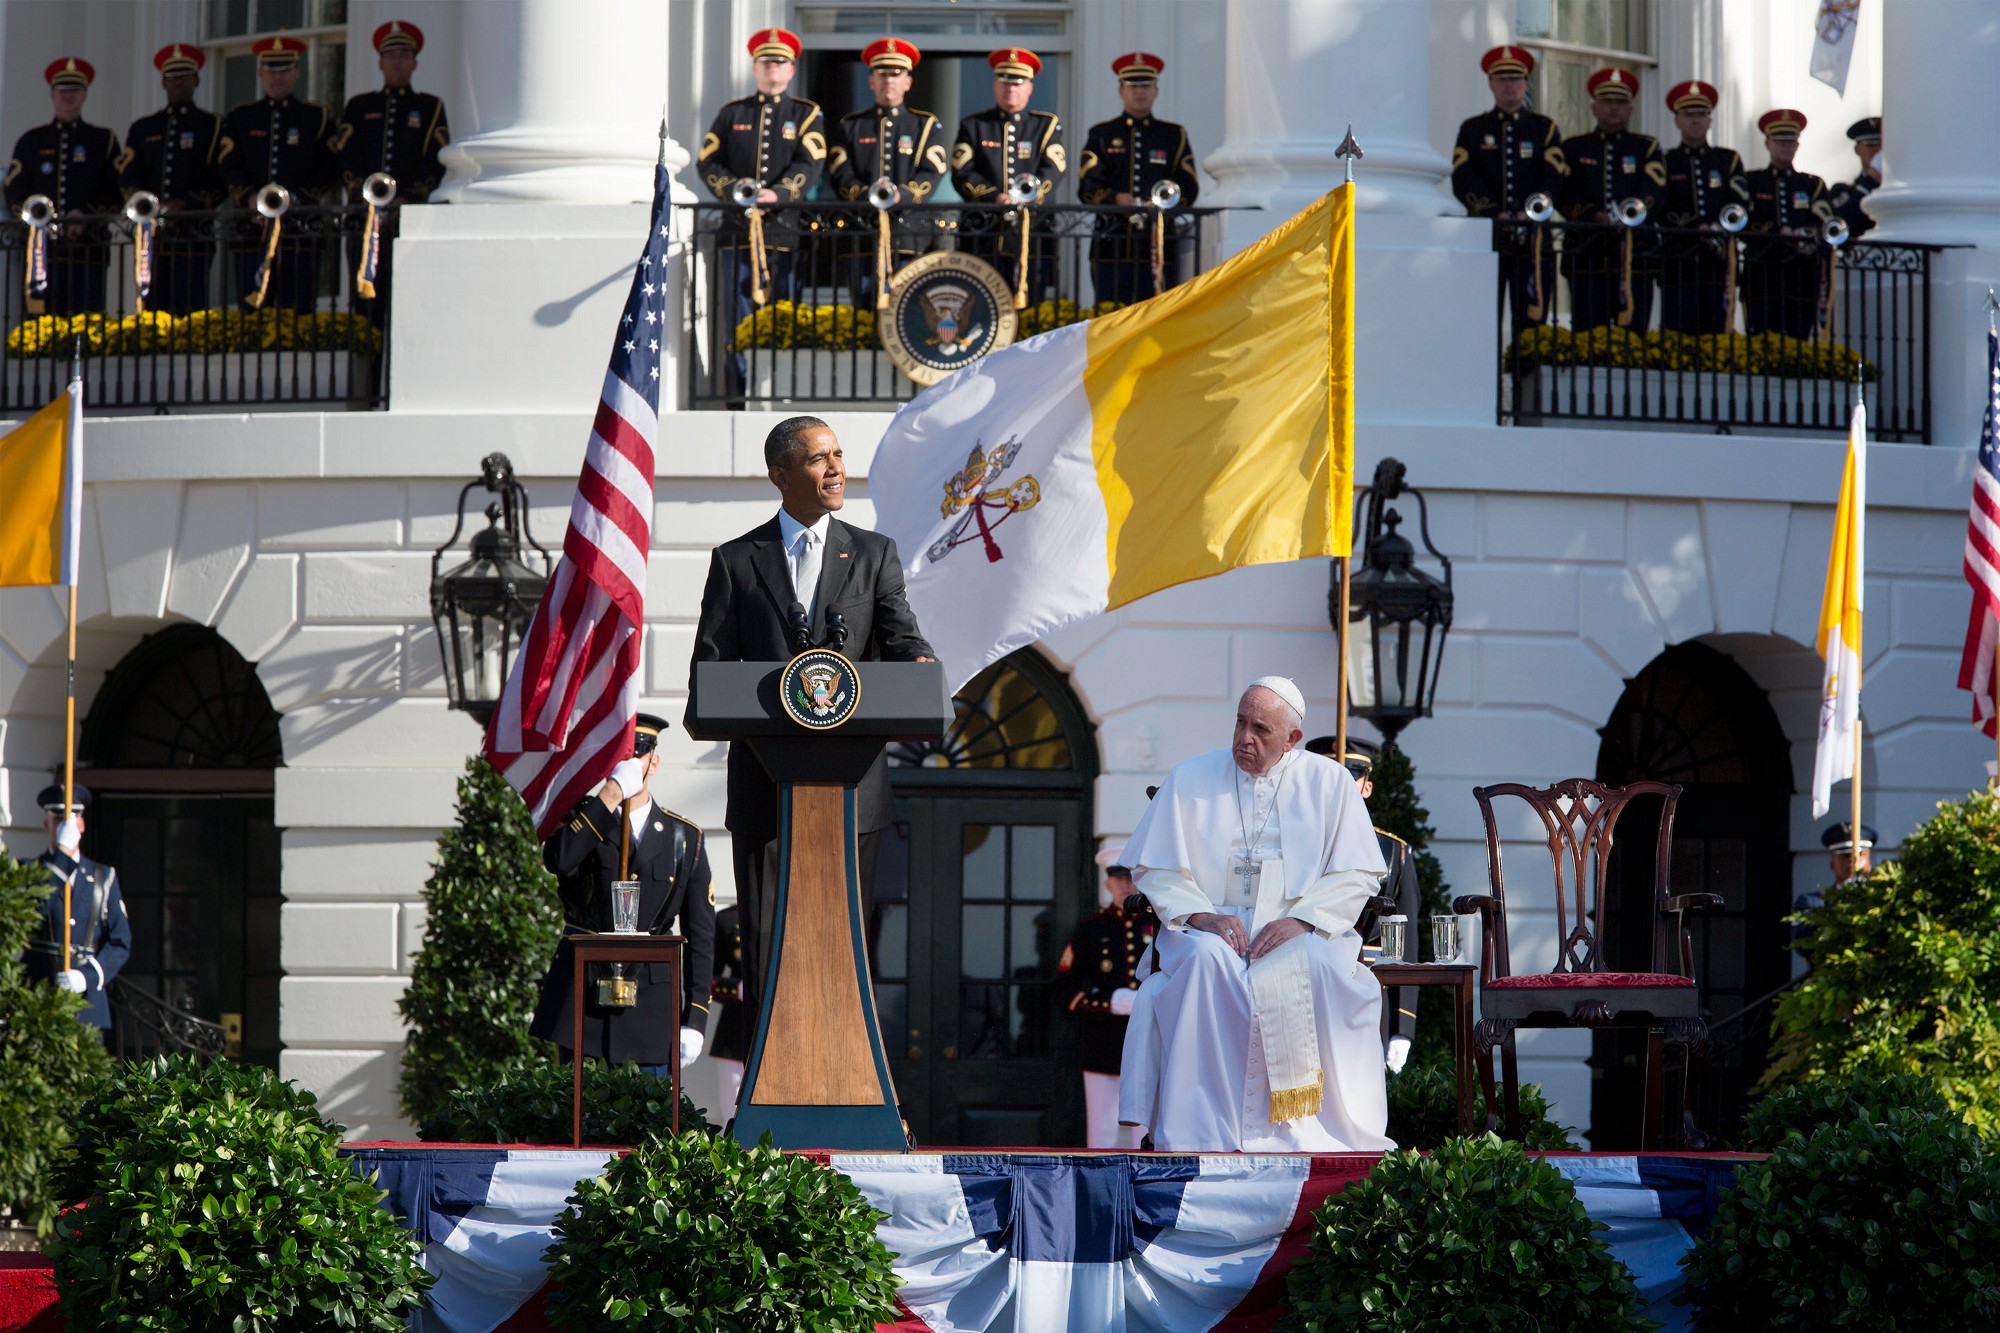 President Obama delivers remarks. (Official White House Photo by Chuck Kennedy)